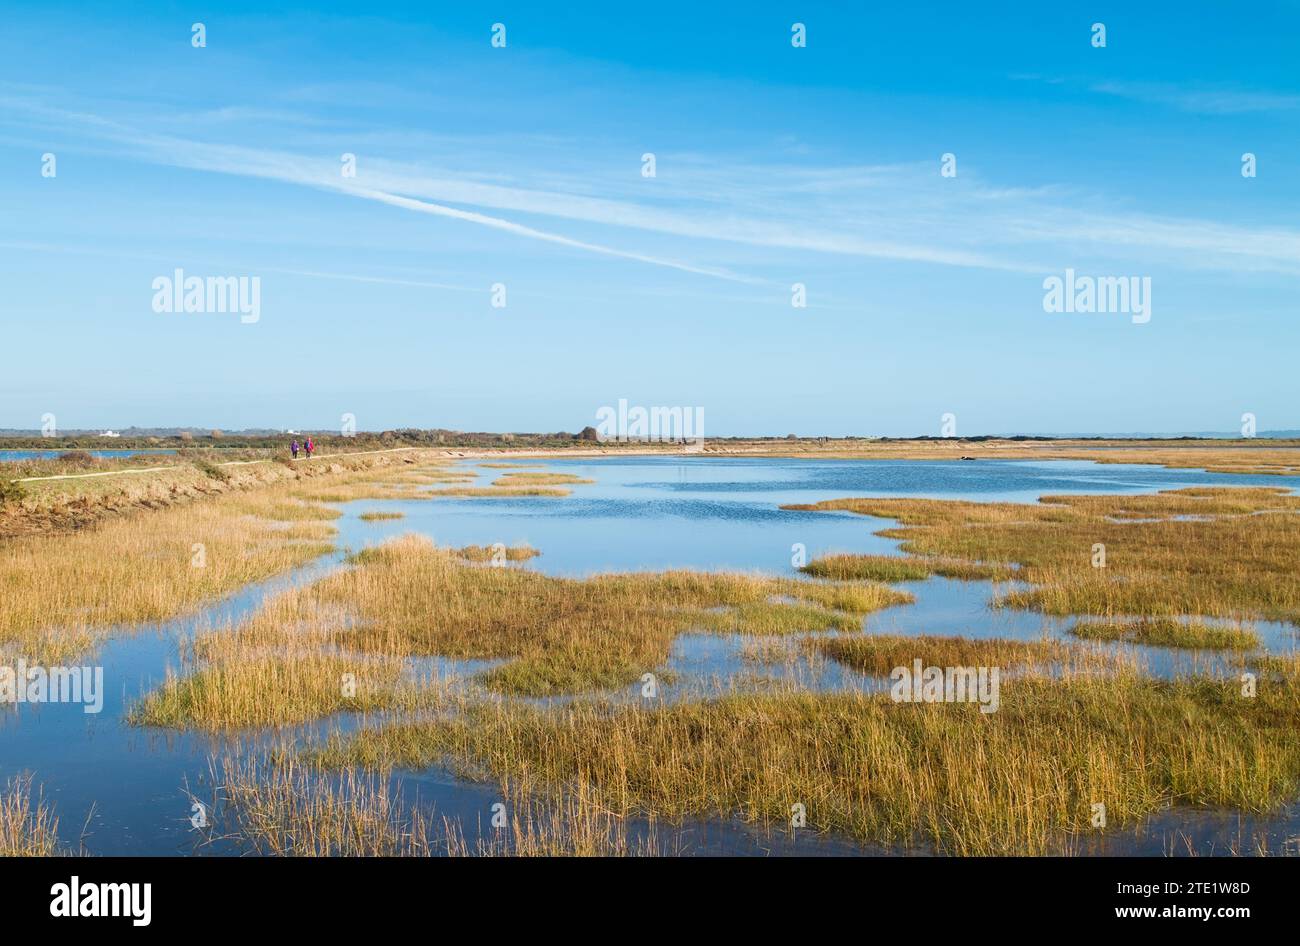 The Solent Way Coastal Path Through The Lagoons And Salt Marshes Of The Lymington And Keyhaven Marshes Nature Reserve UK Stock Photo